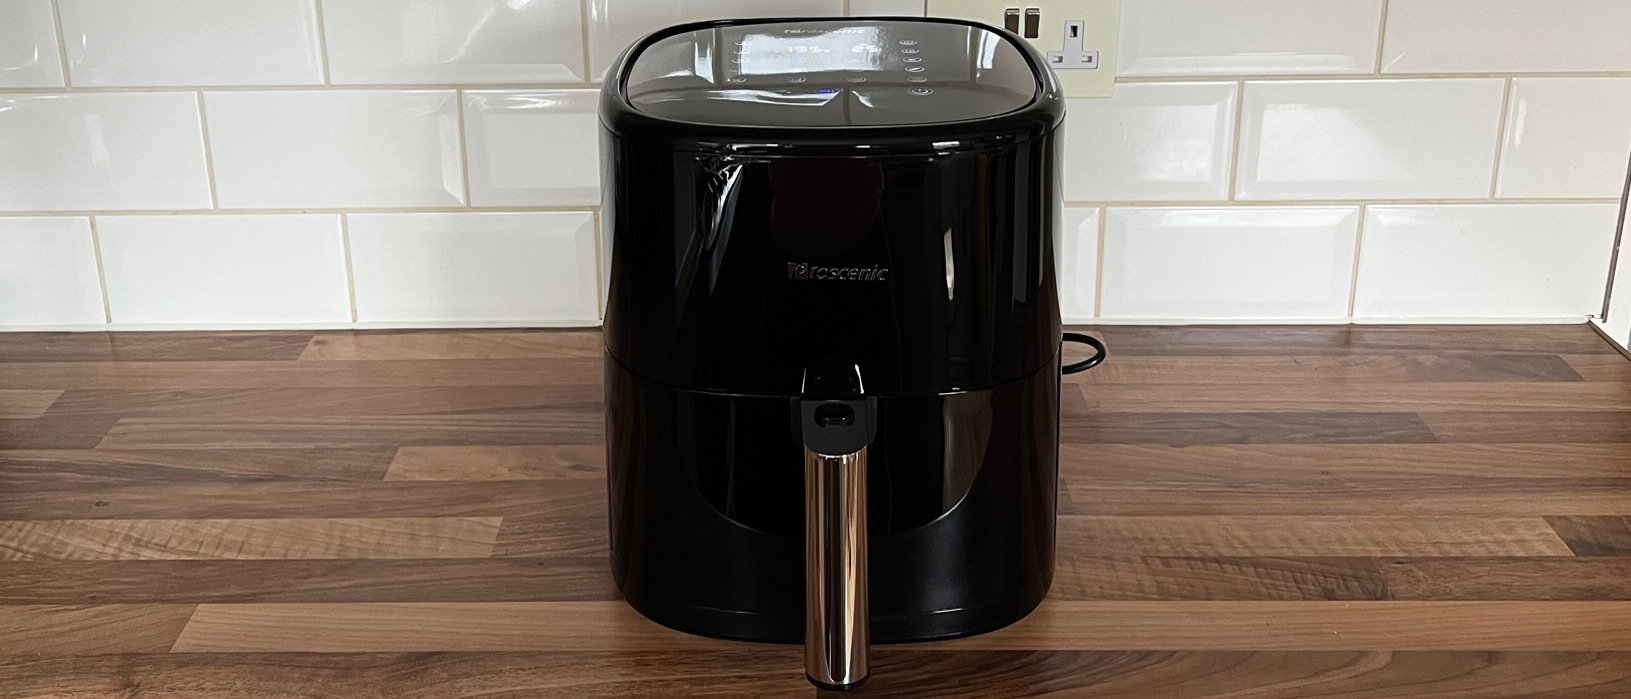 Proscenic T22 air fryer review